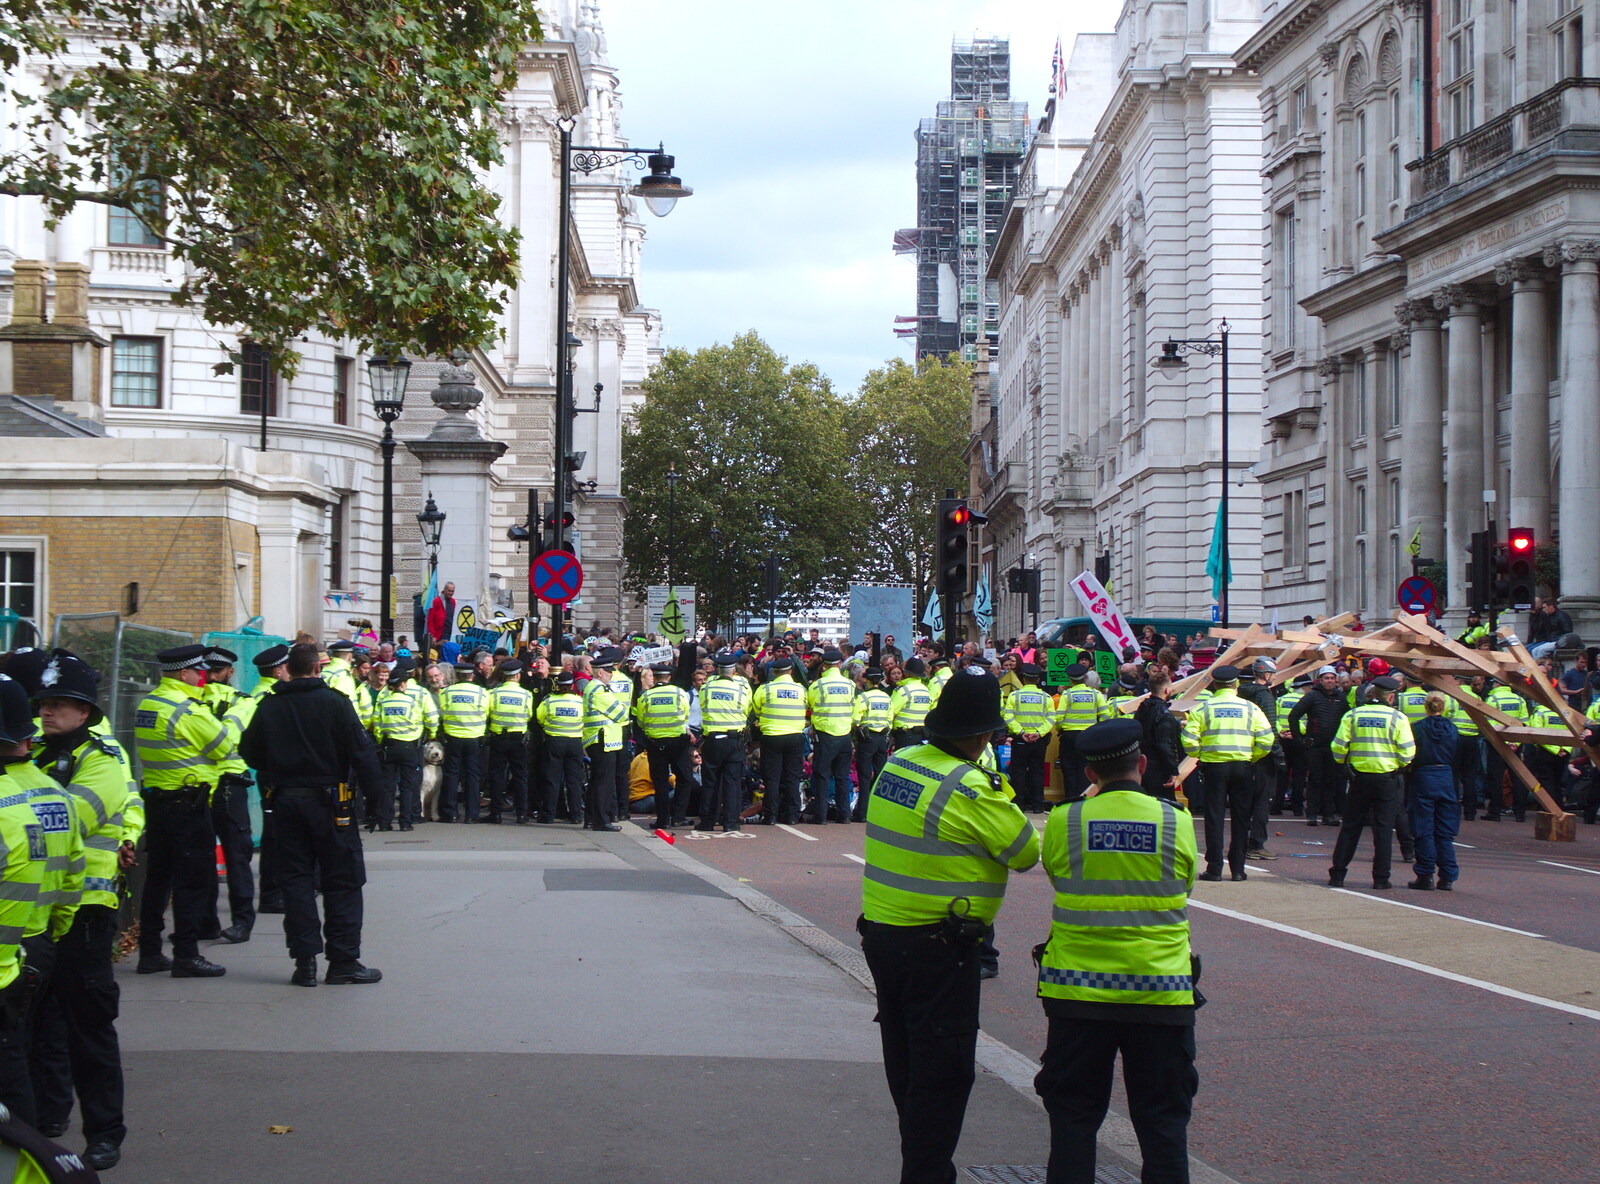 There's a much heavier police presence this time from The Extinction Rebellion Protest, Westminster, London - 9th October 2019